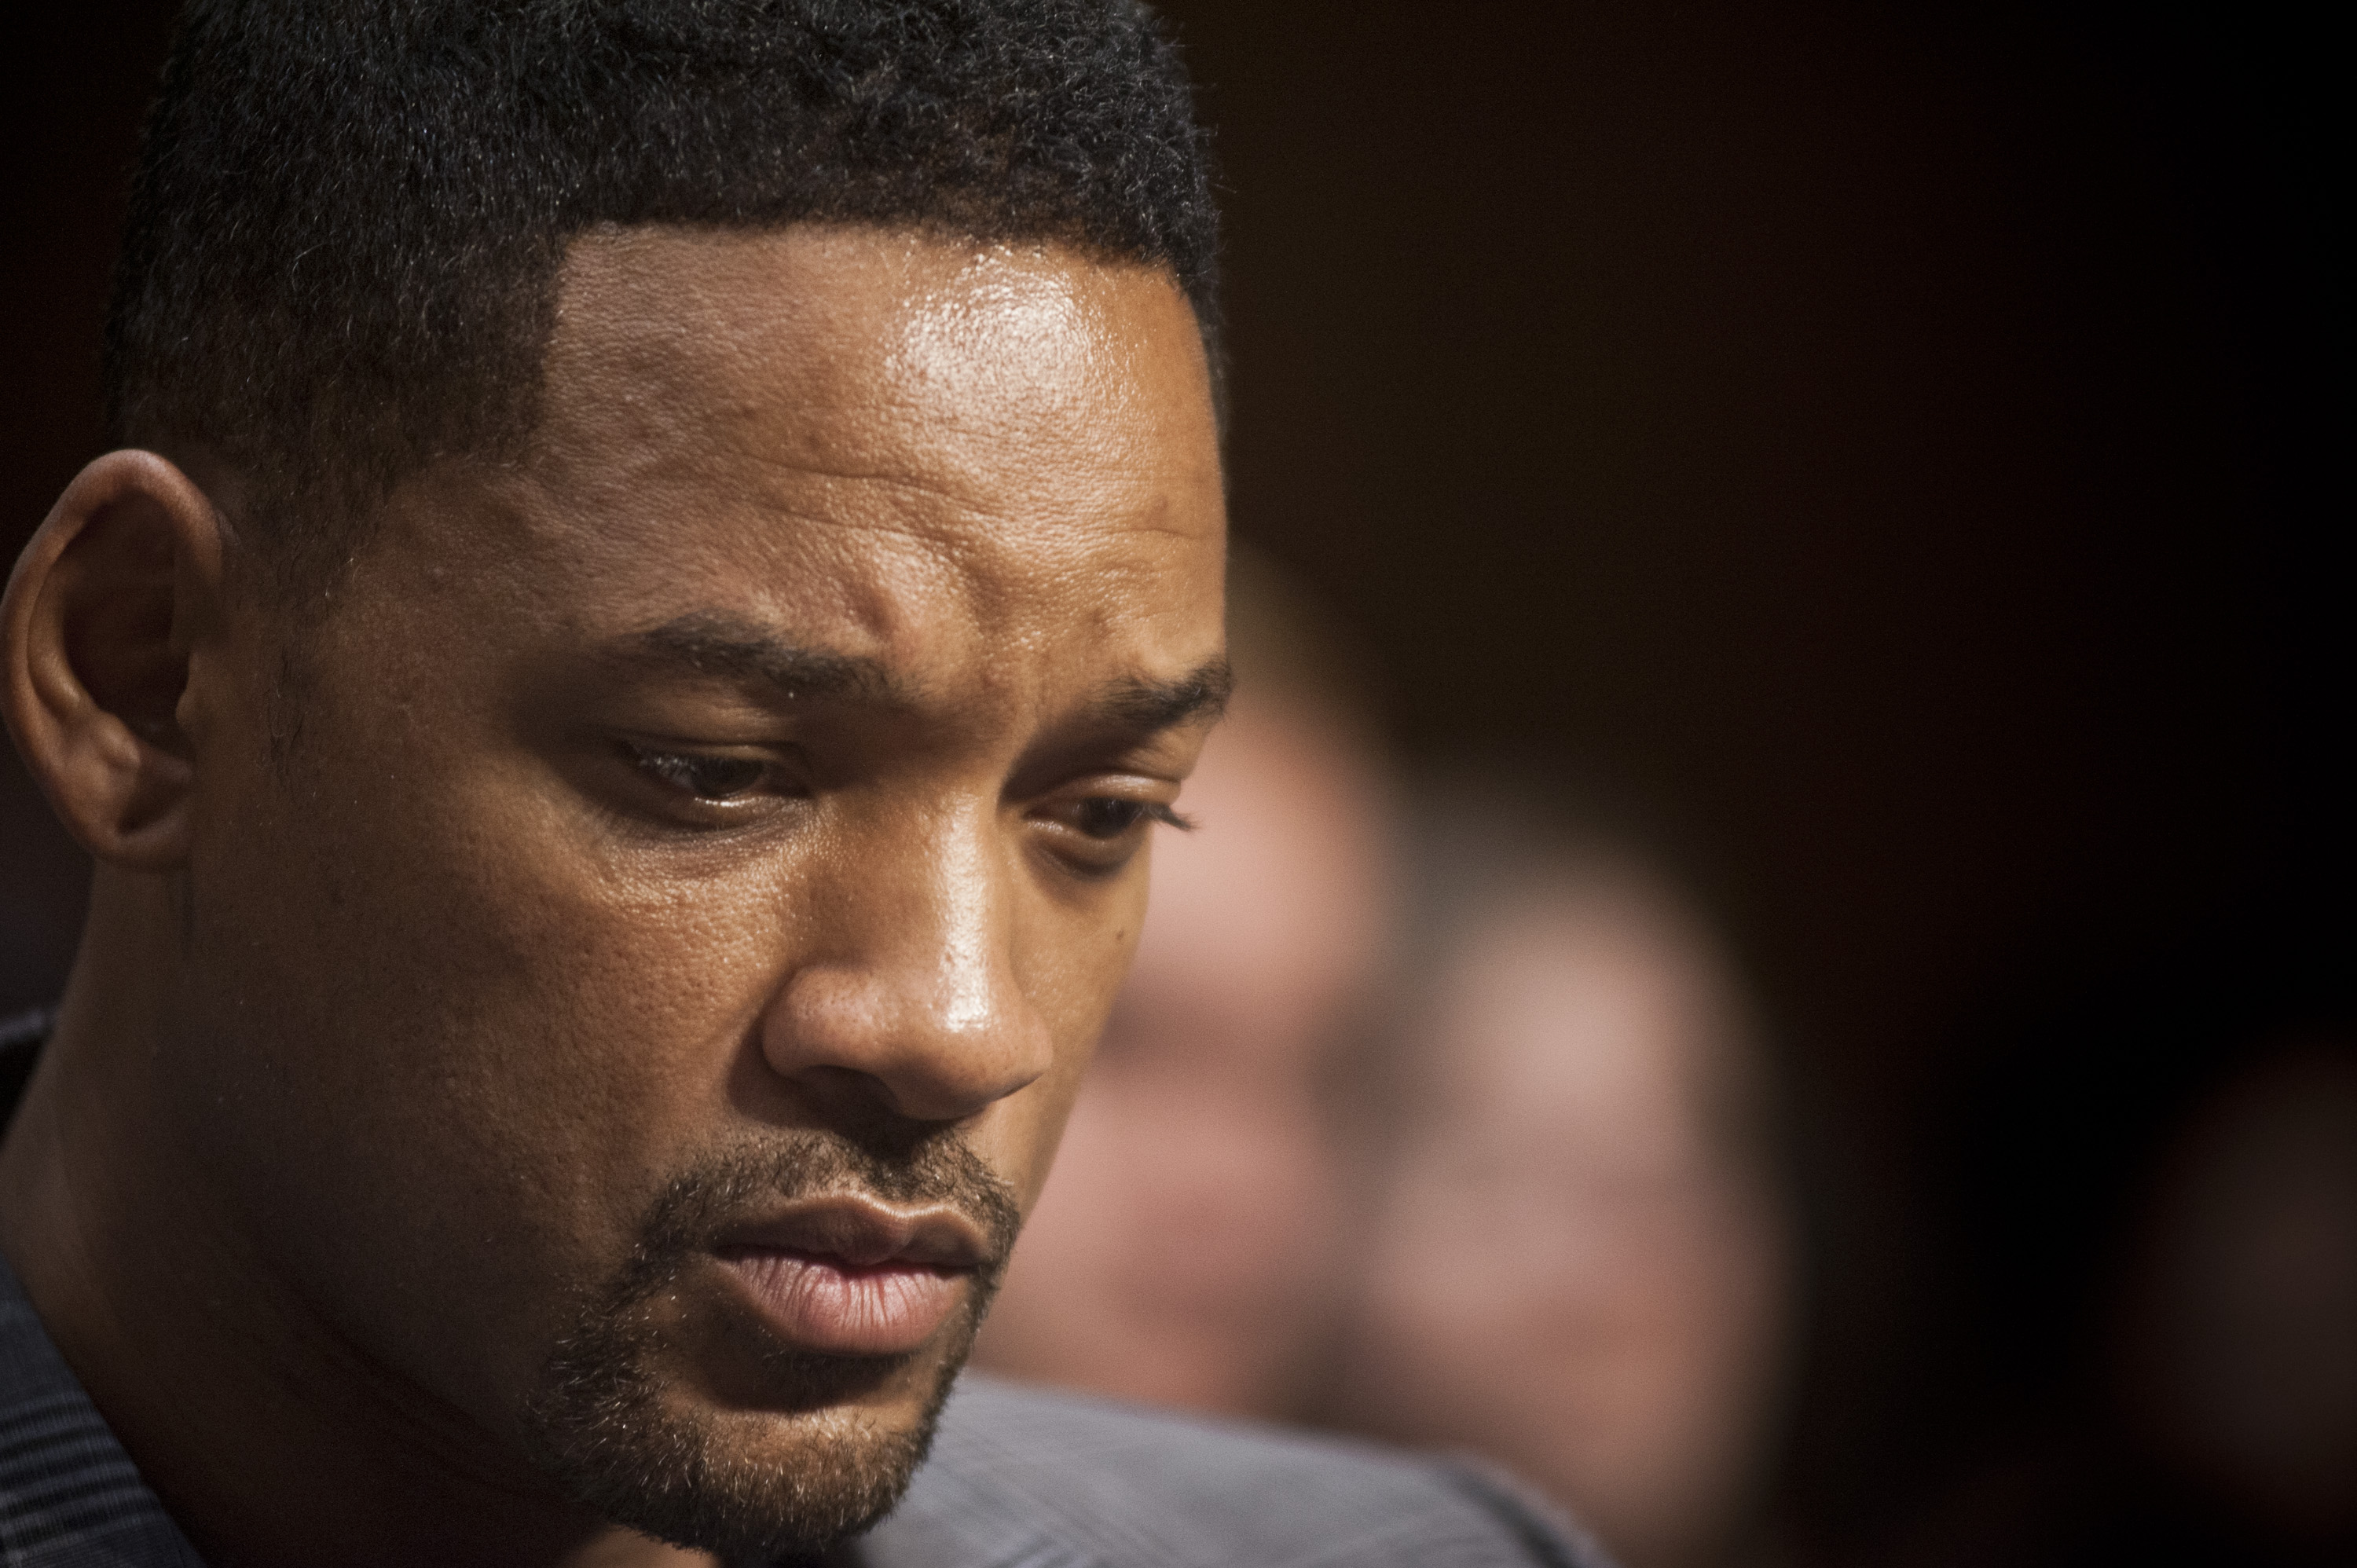 Will Smith at "The Next Ten Years In The Fight Against Human Trafficking: Attacking The Problem With The Right Tools" committee hearing in Washington, D.C. on July 17, 2012. | Source: Getty Images